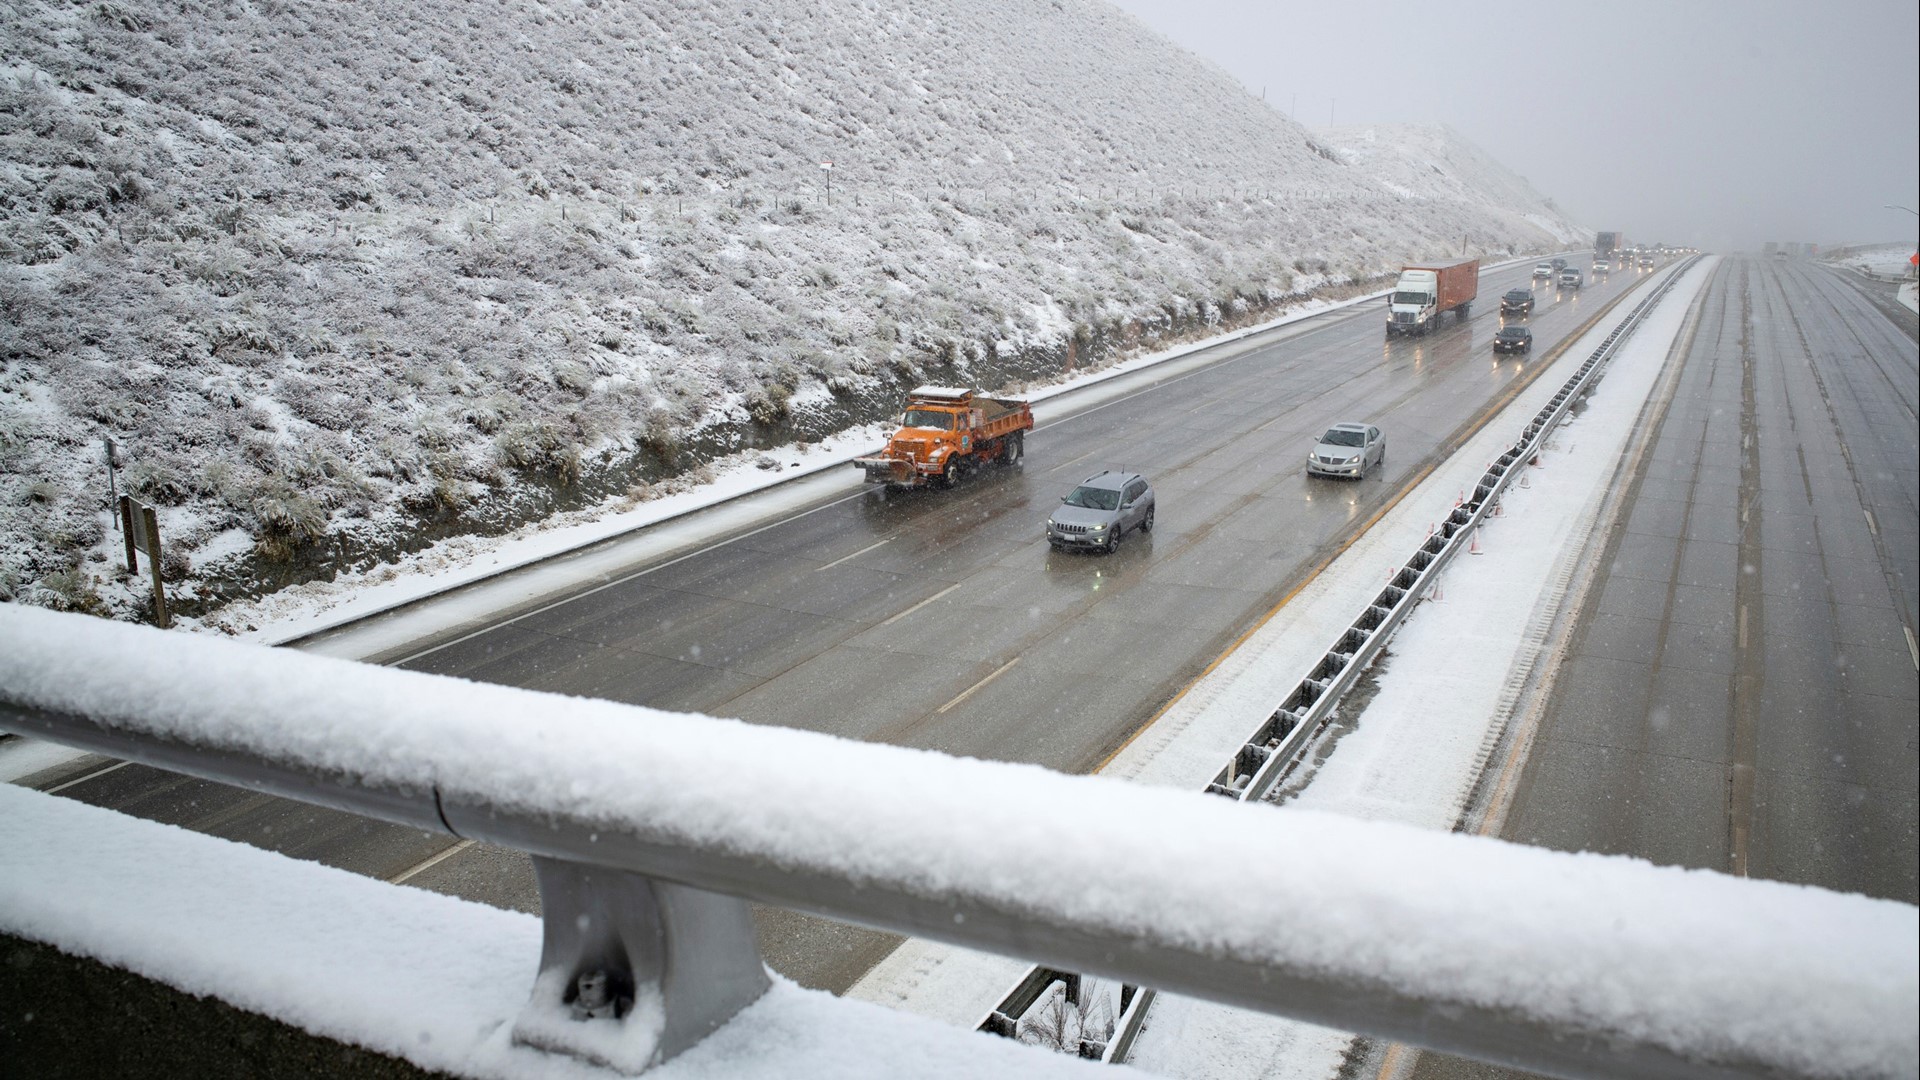 Snow and spinouts forced Caltrans to shut down I-80 between Colfax and the Nevada state line Friday night, stranding drivers. More snow is expected later Saturday.